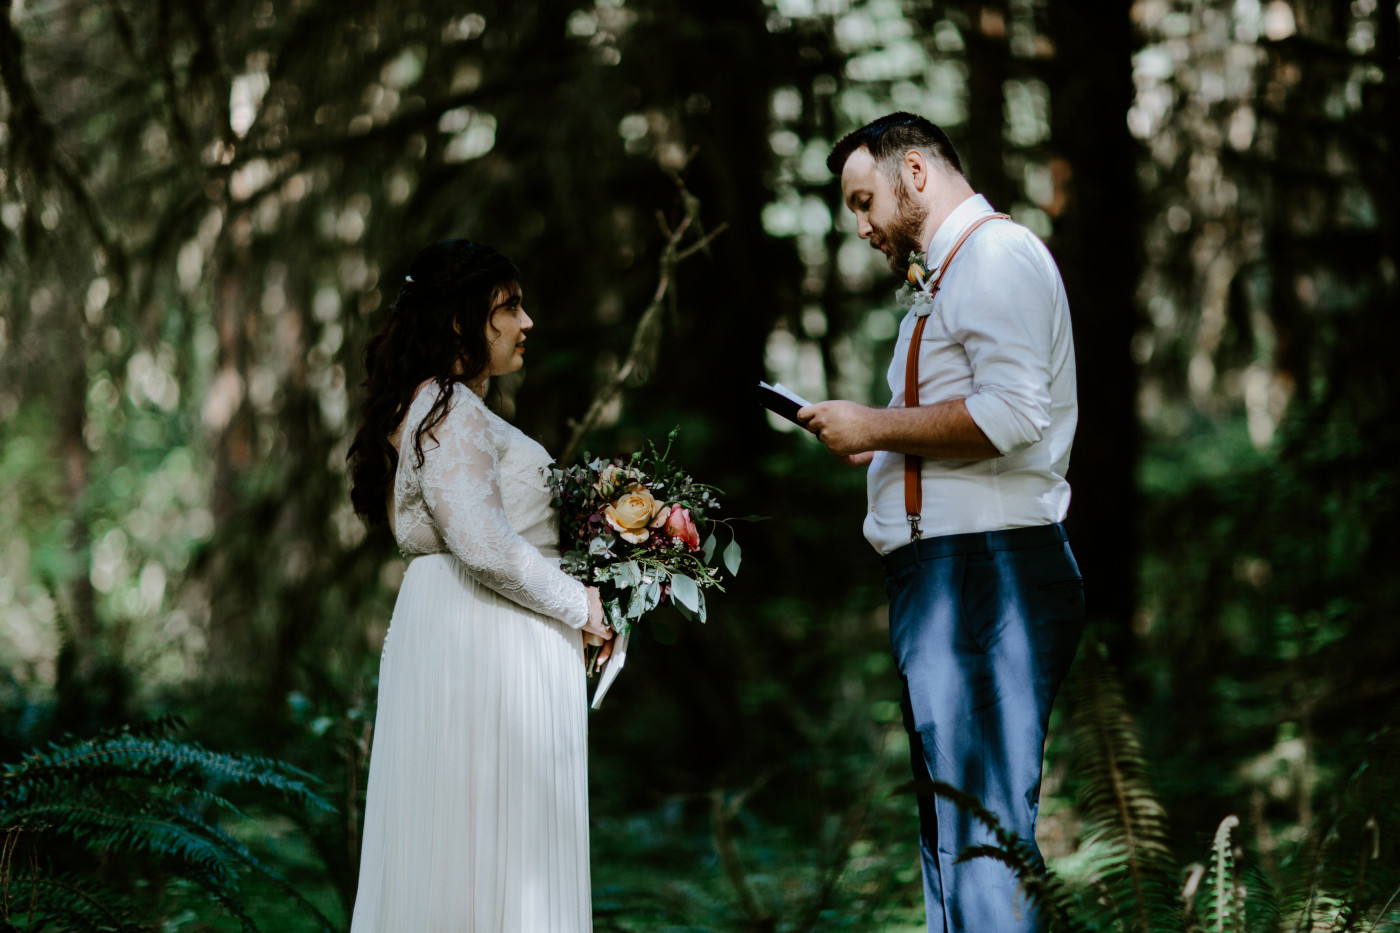 Brooke and Jack take a moment to talk near the stream. Elopement photography at Olympic National Park by Sienna Plus Josh.